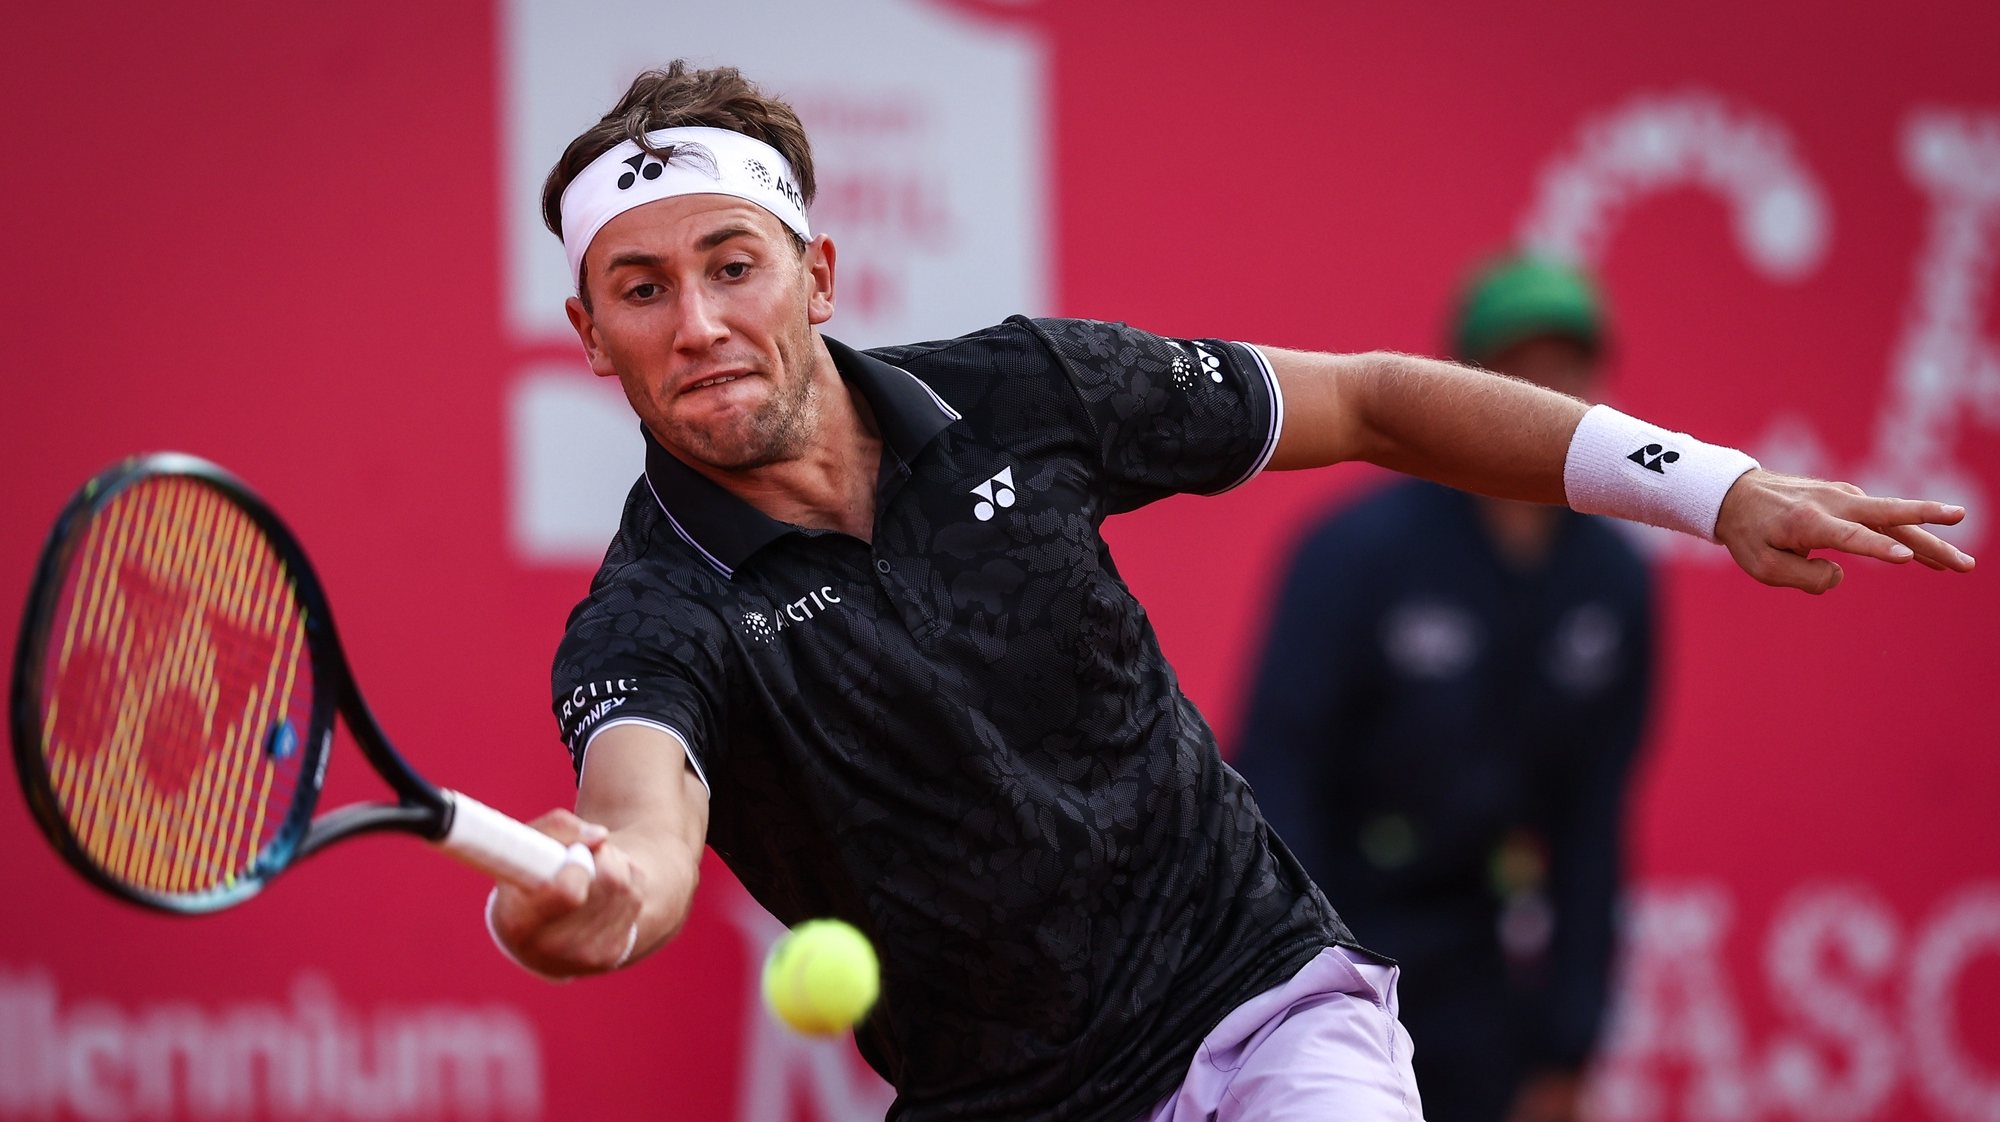 Casper Ruud from Norway in action against Quentin Halys from France during their semi-final match at the Estoril Open tennis tournament in Estoril, Portugal, 08 April 2023. RODRIGO ANTUNES/LUSA